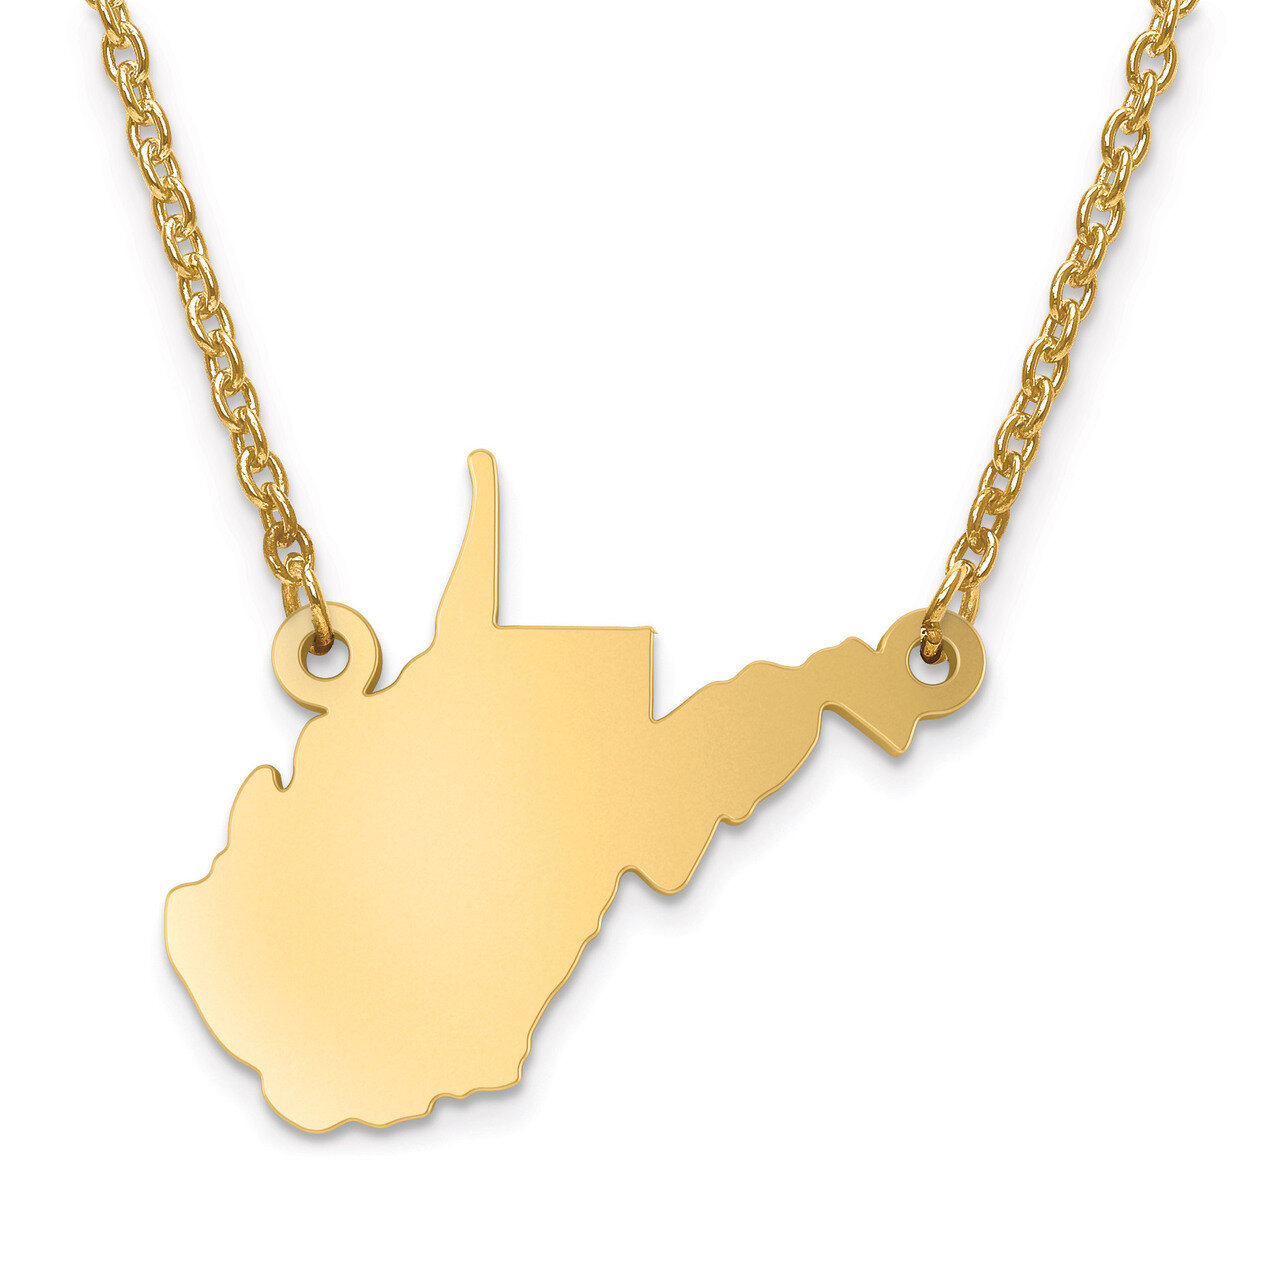 West Virginia State Pendant with Chain Engravable Gold-plated on Sterling Silver